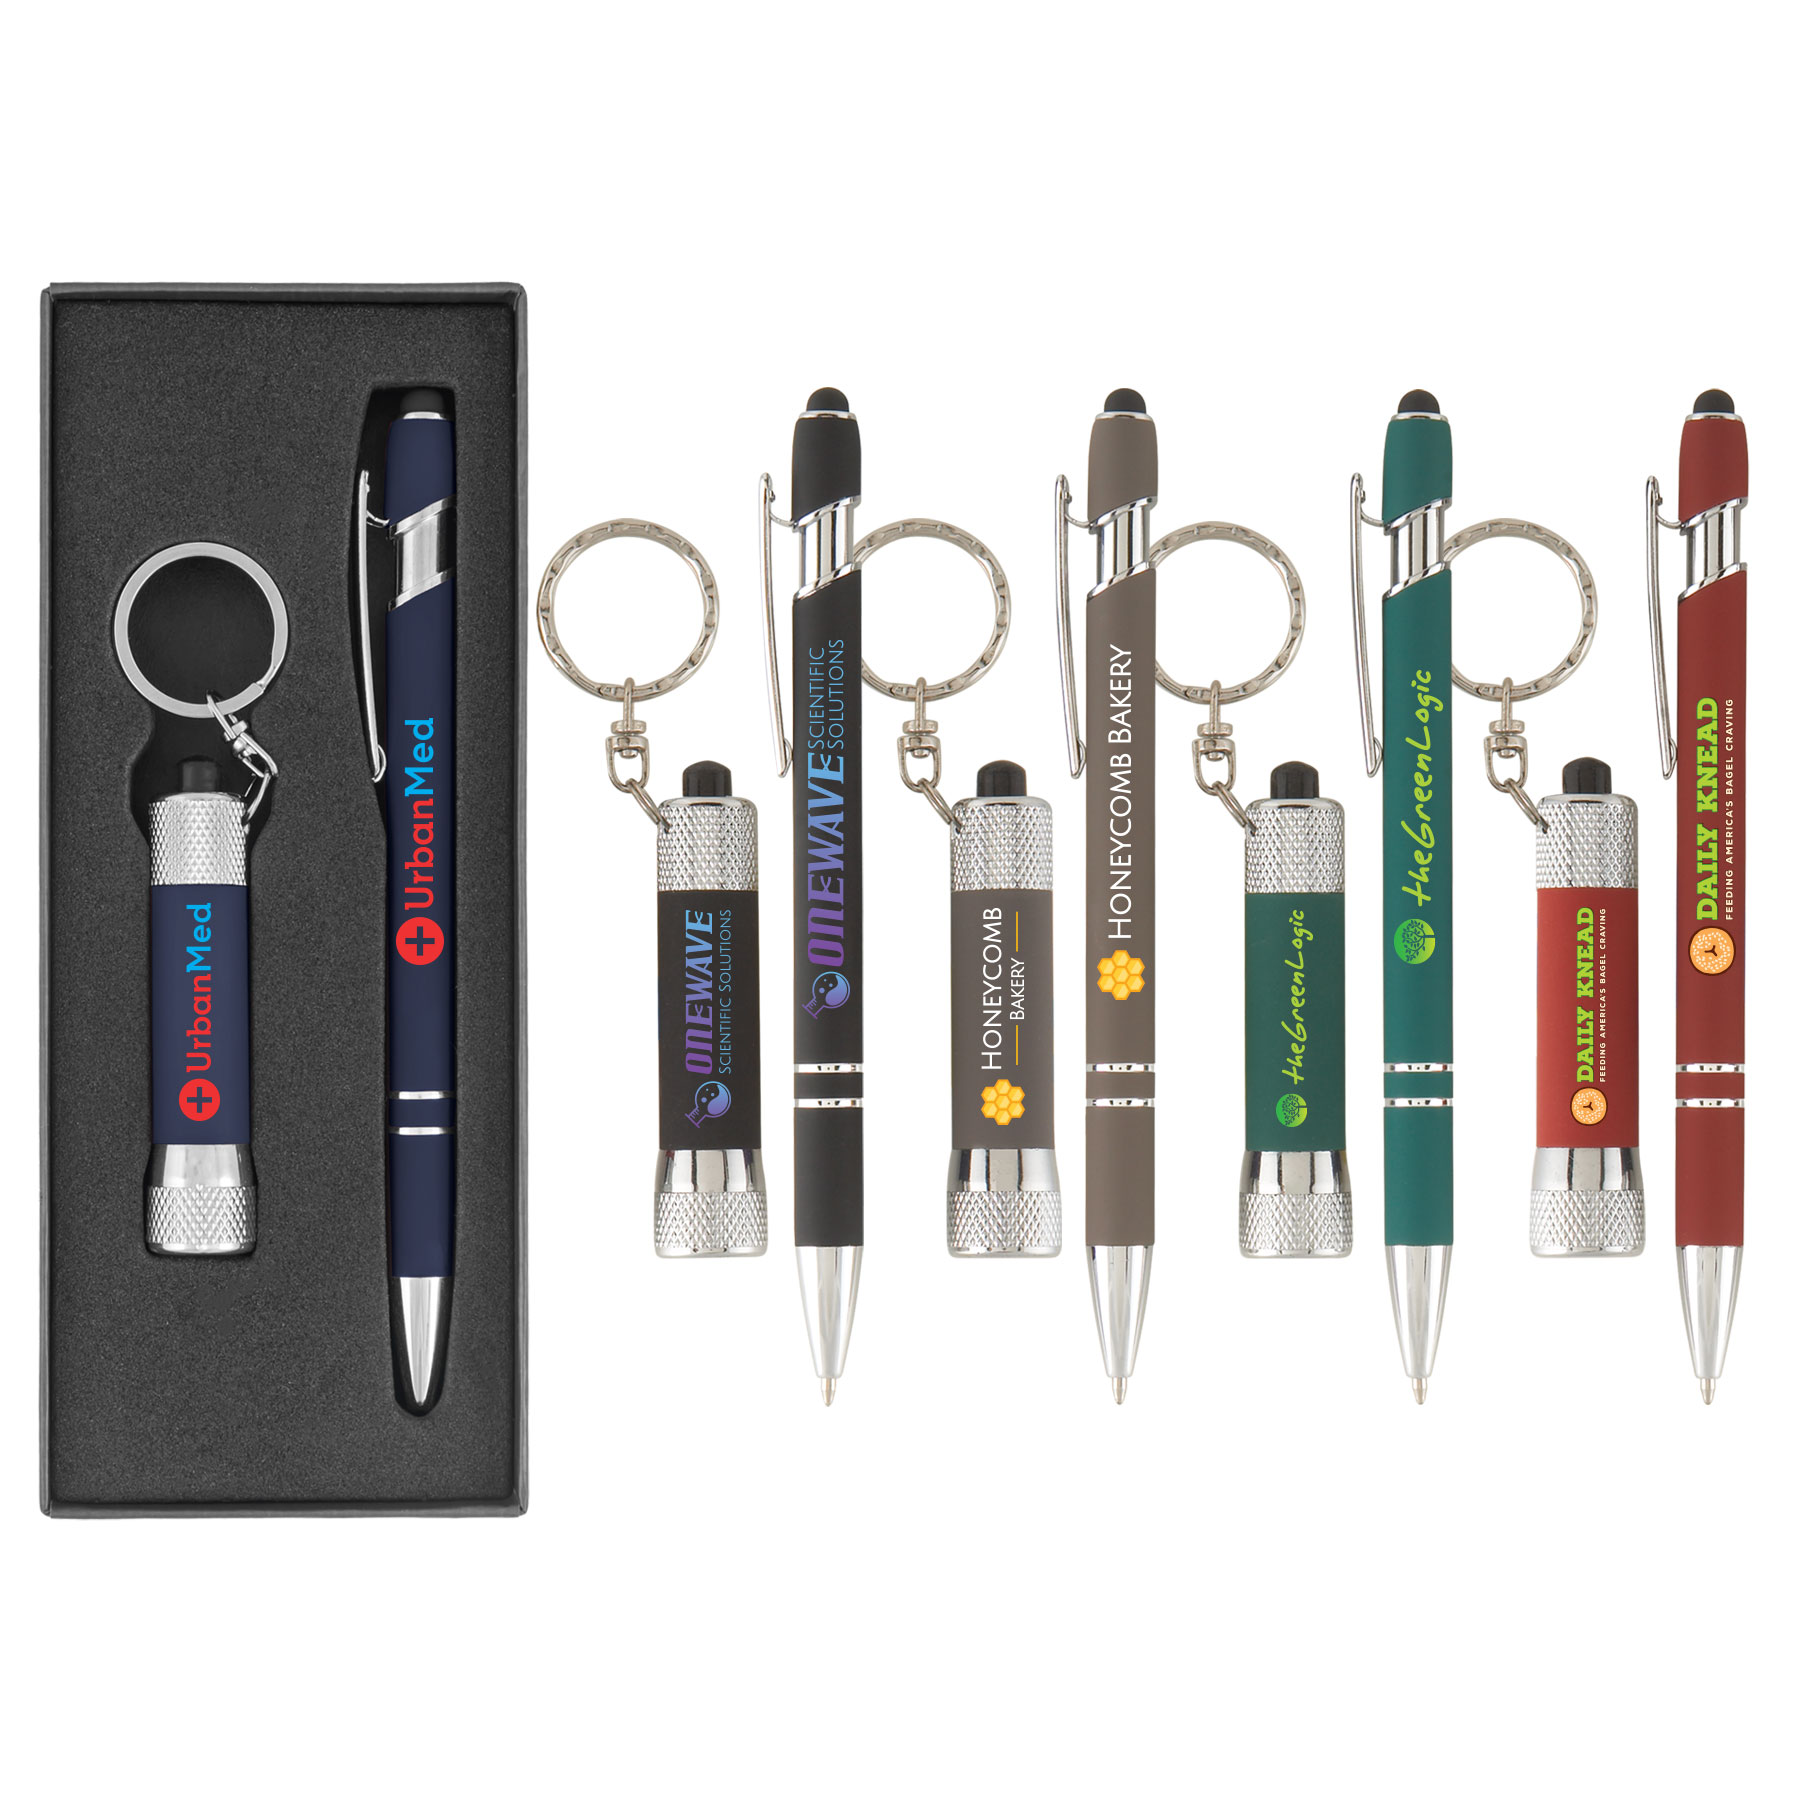 Executive Soft Touch Key Light and Pen Gift Set (Full Color Design)